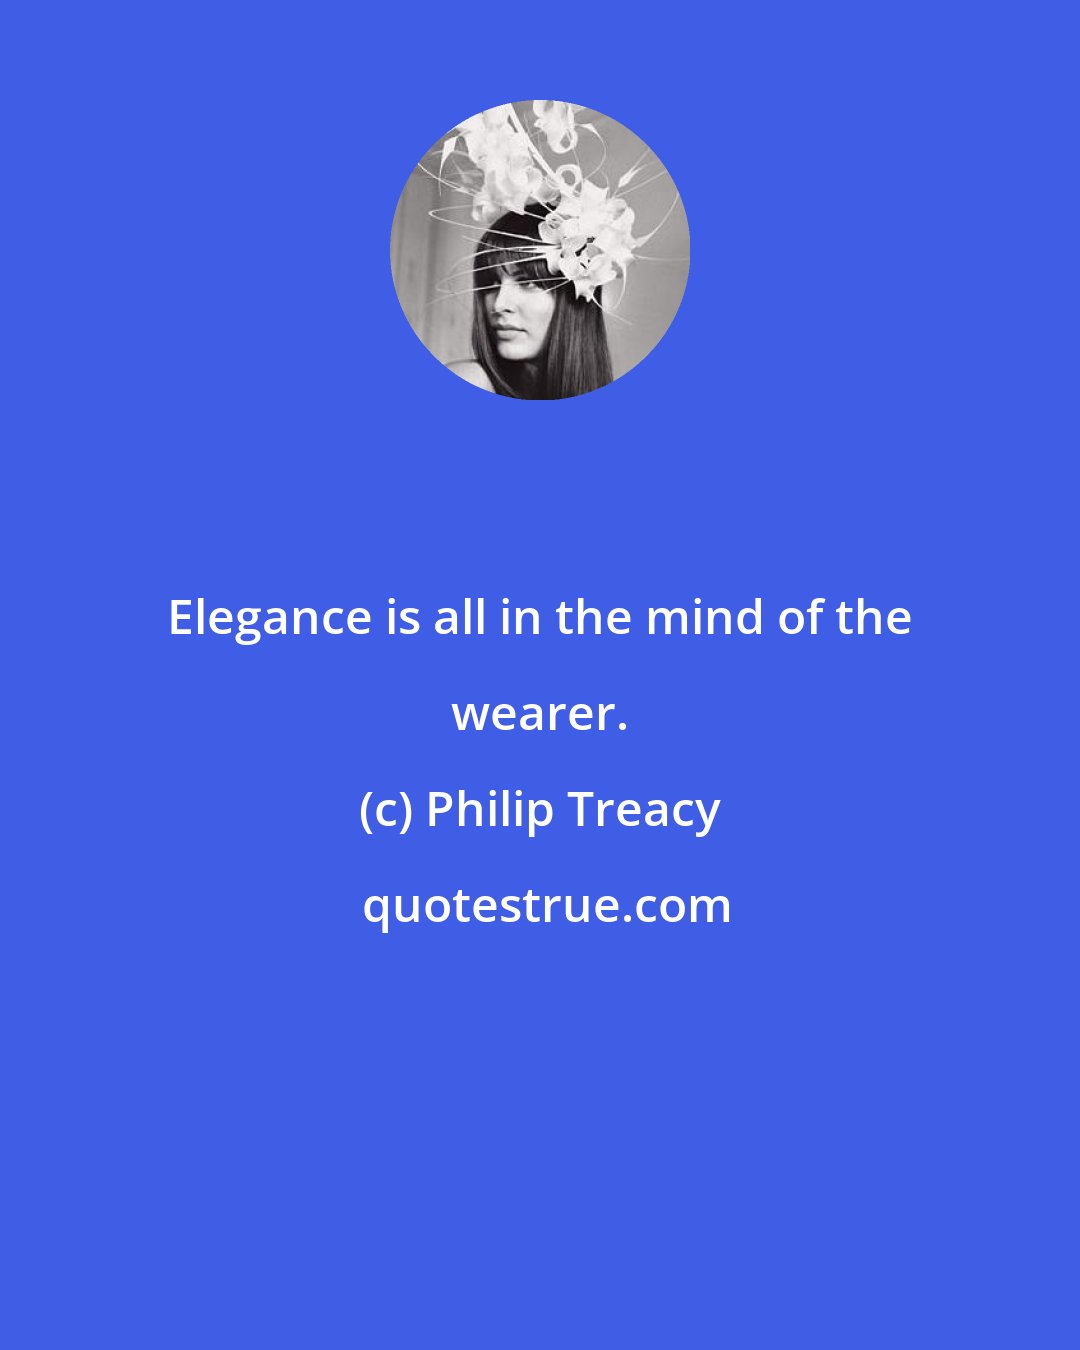 Philip Treacy: Elegance is all in the mind of the wearer.